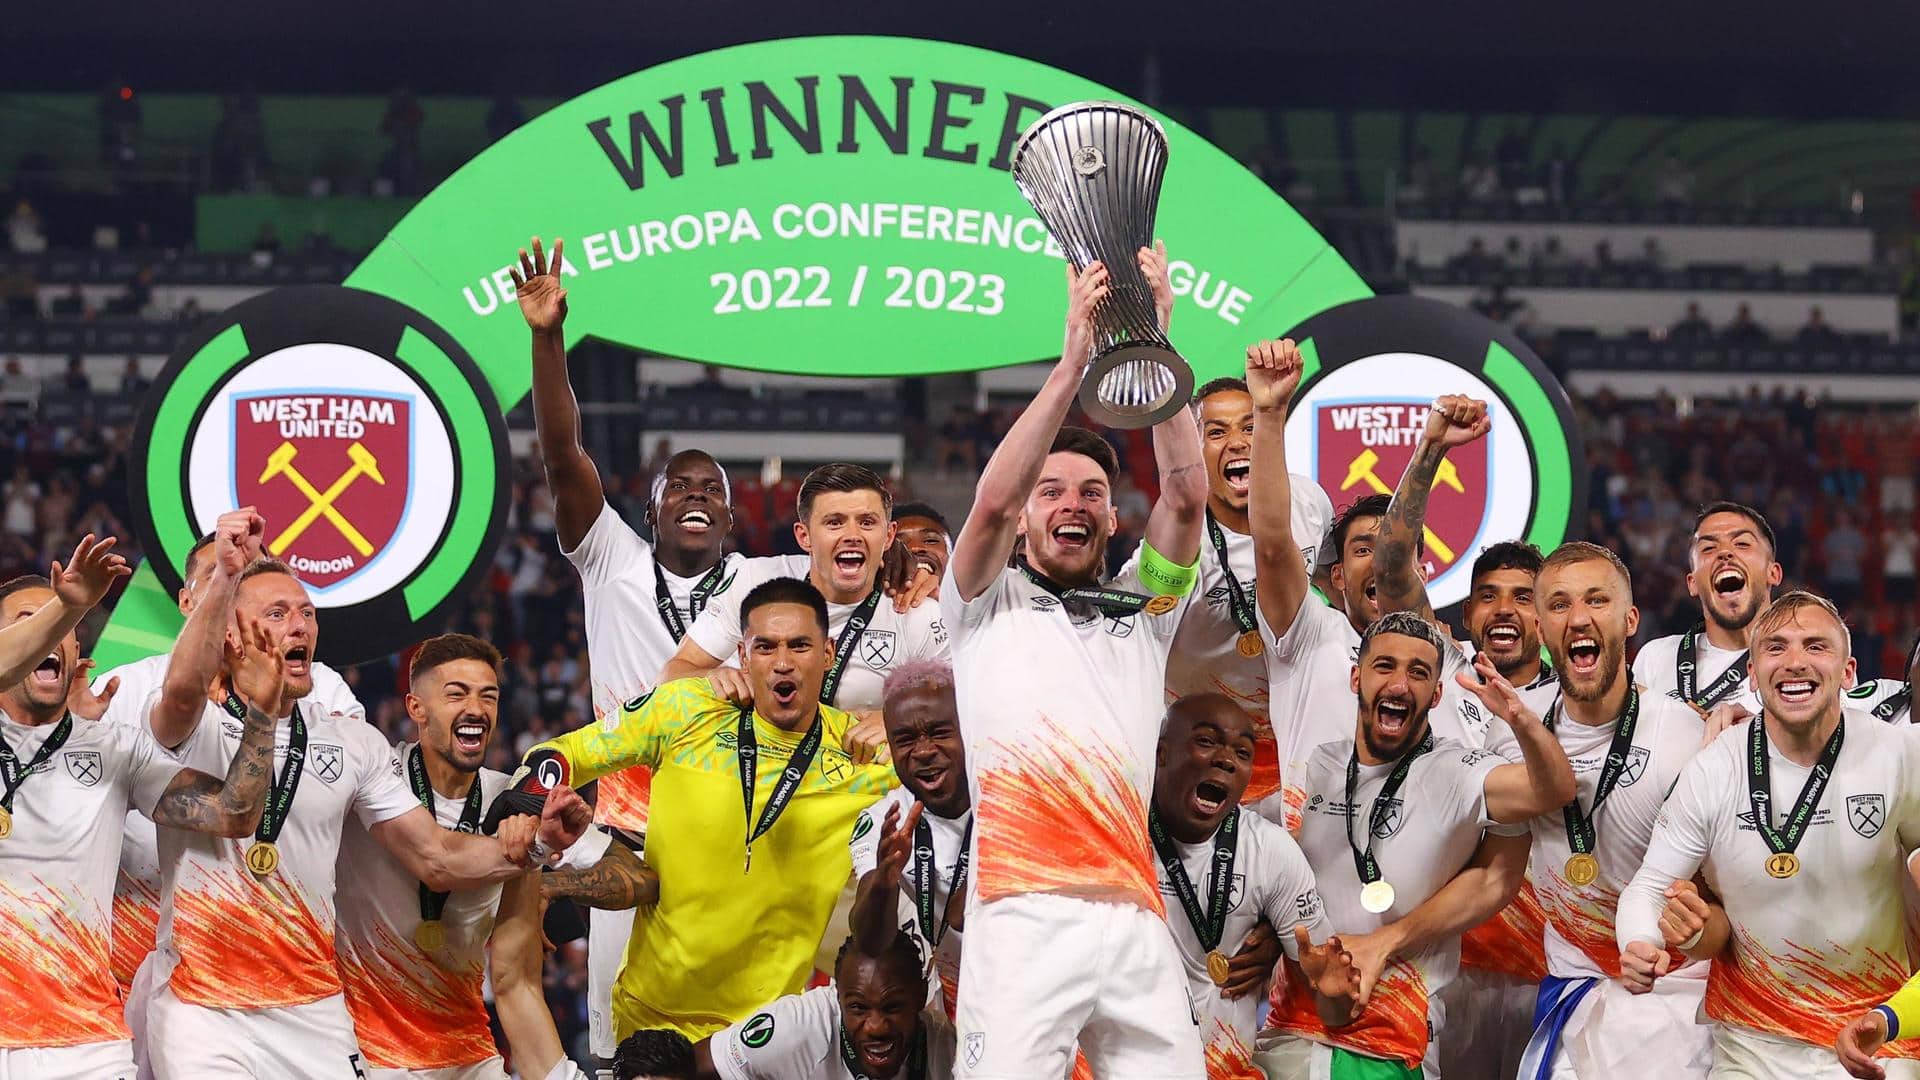 West Ham United win Europa Conference League title: Key stats